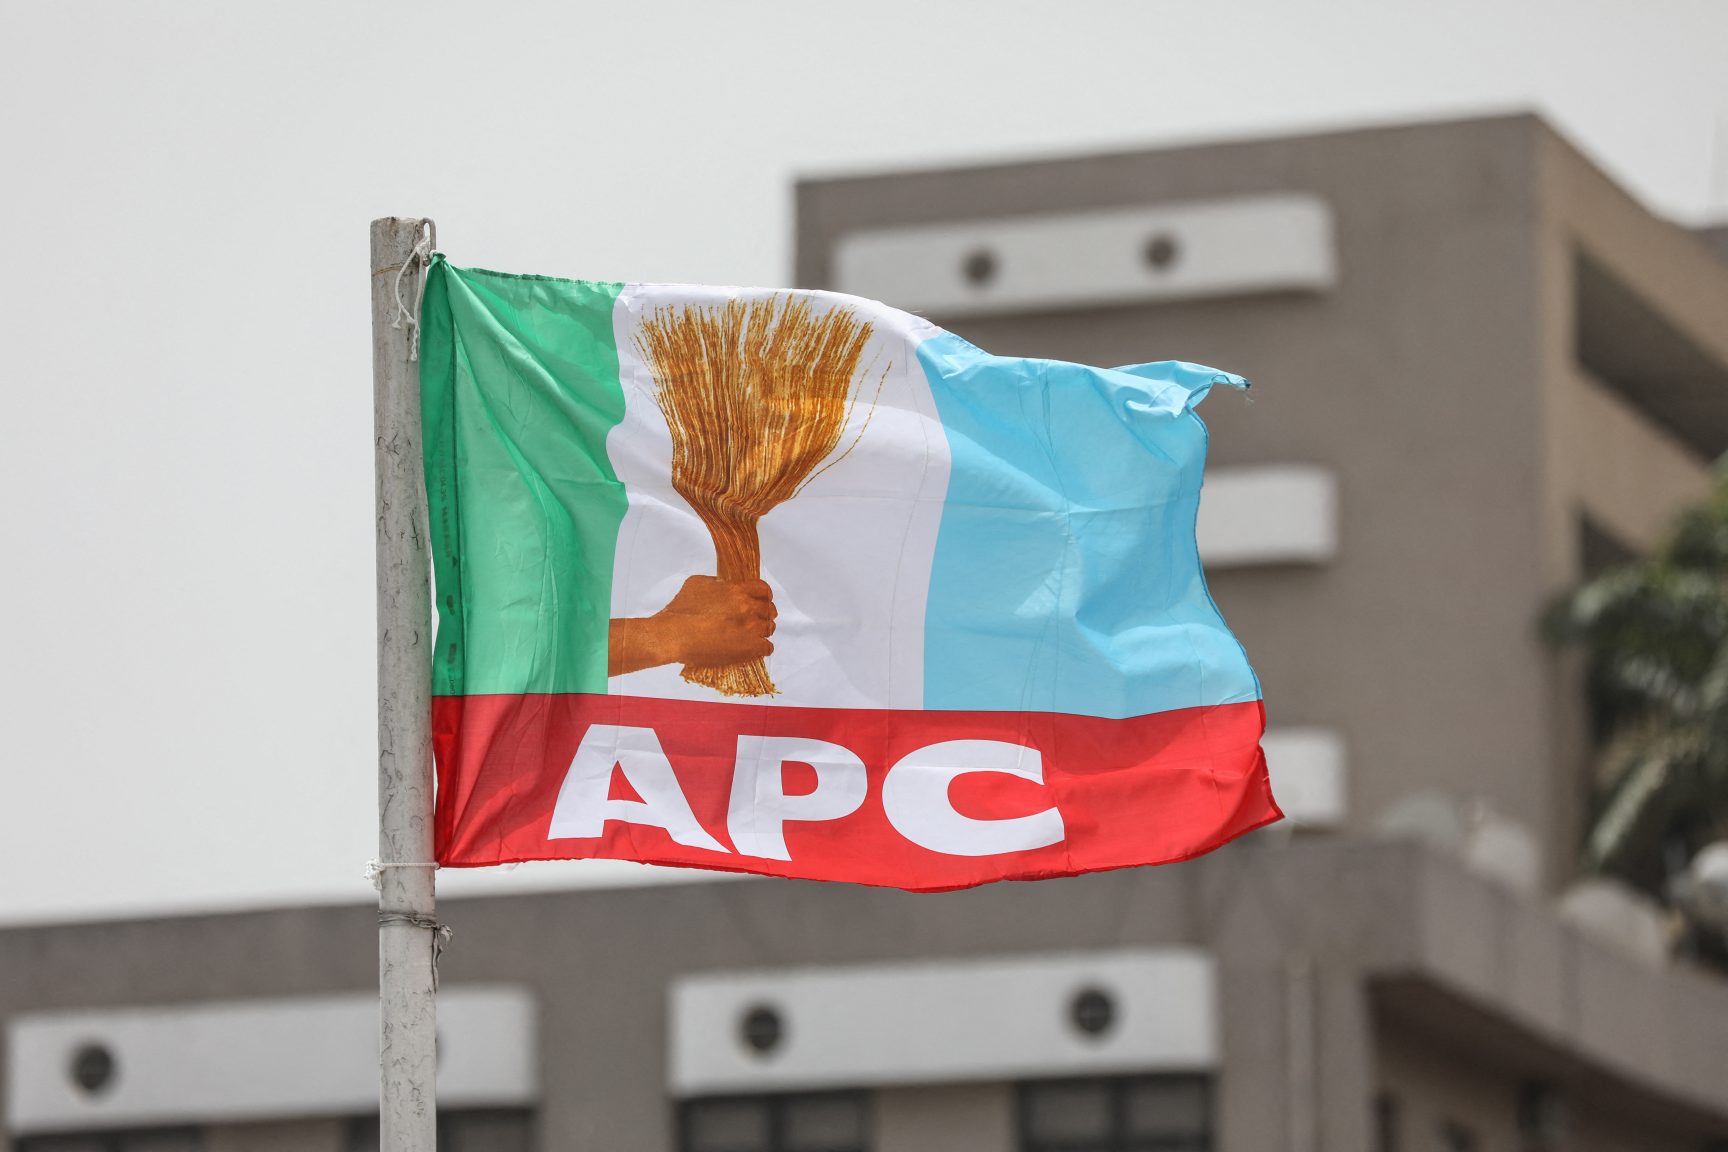 APC-led government has made life unbearable for Nigerians – Group